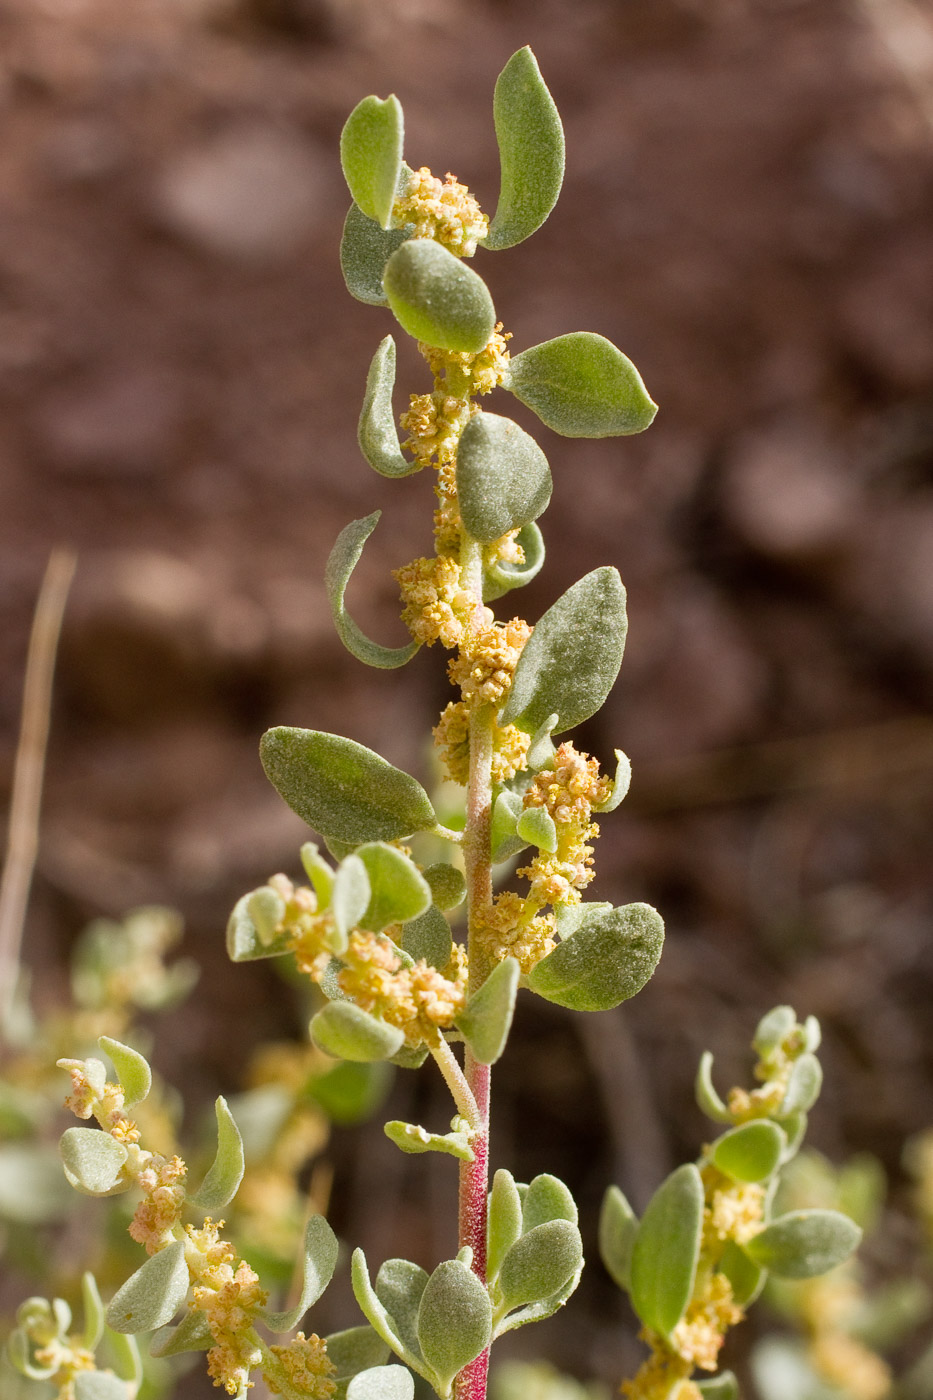 Small yellow flowers adjacent to stem; light green, fuzzy leaves are upturned